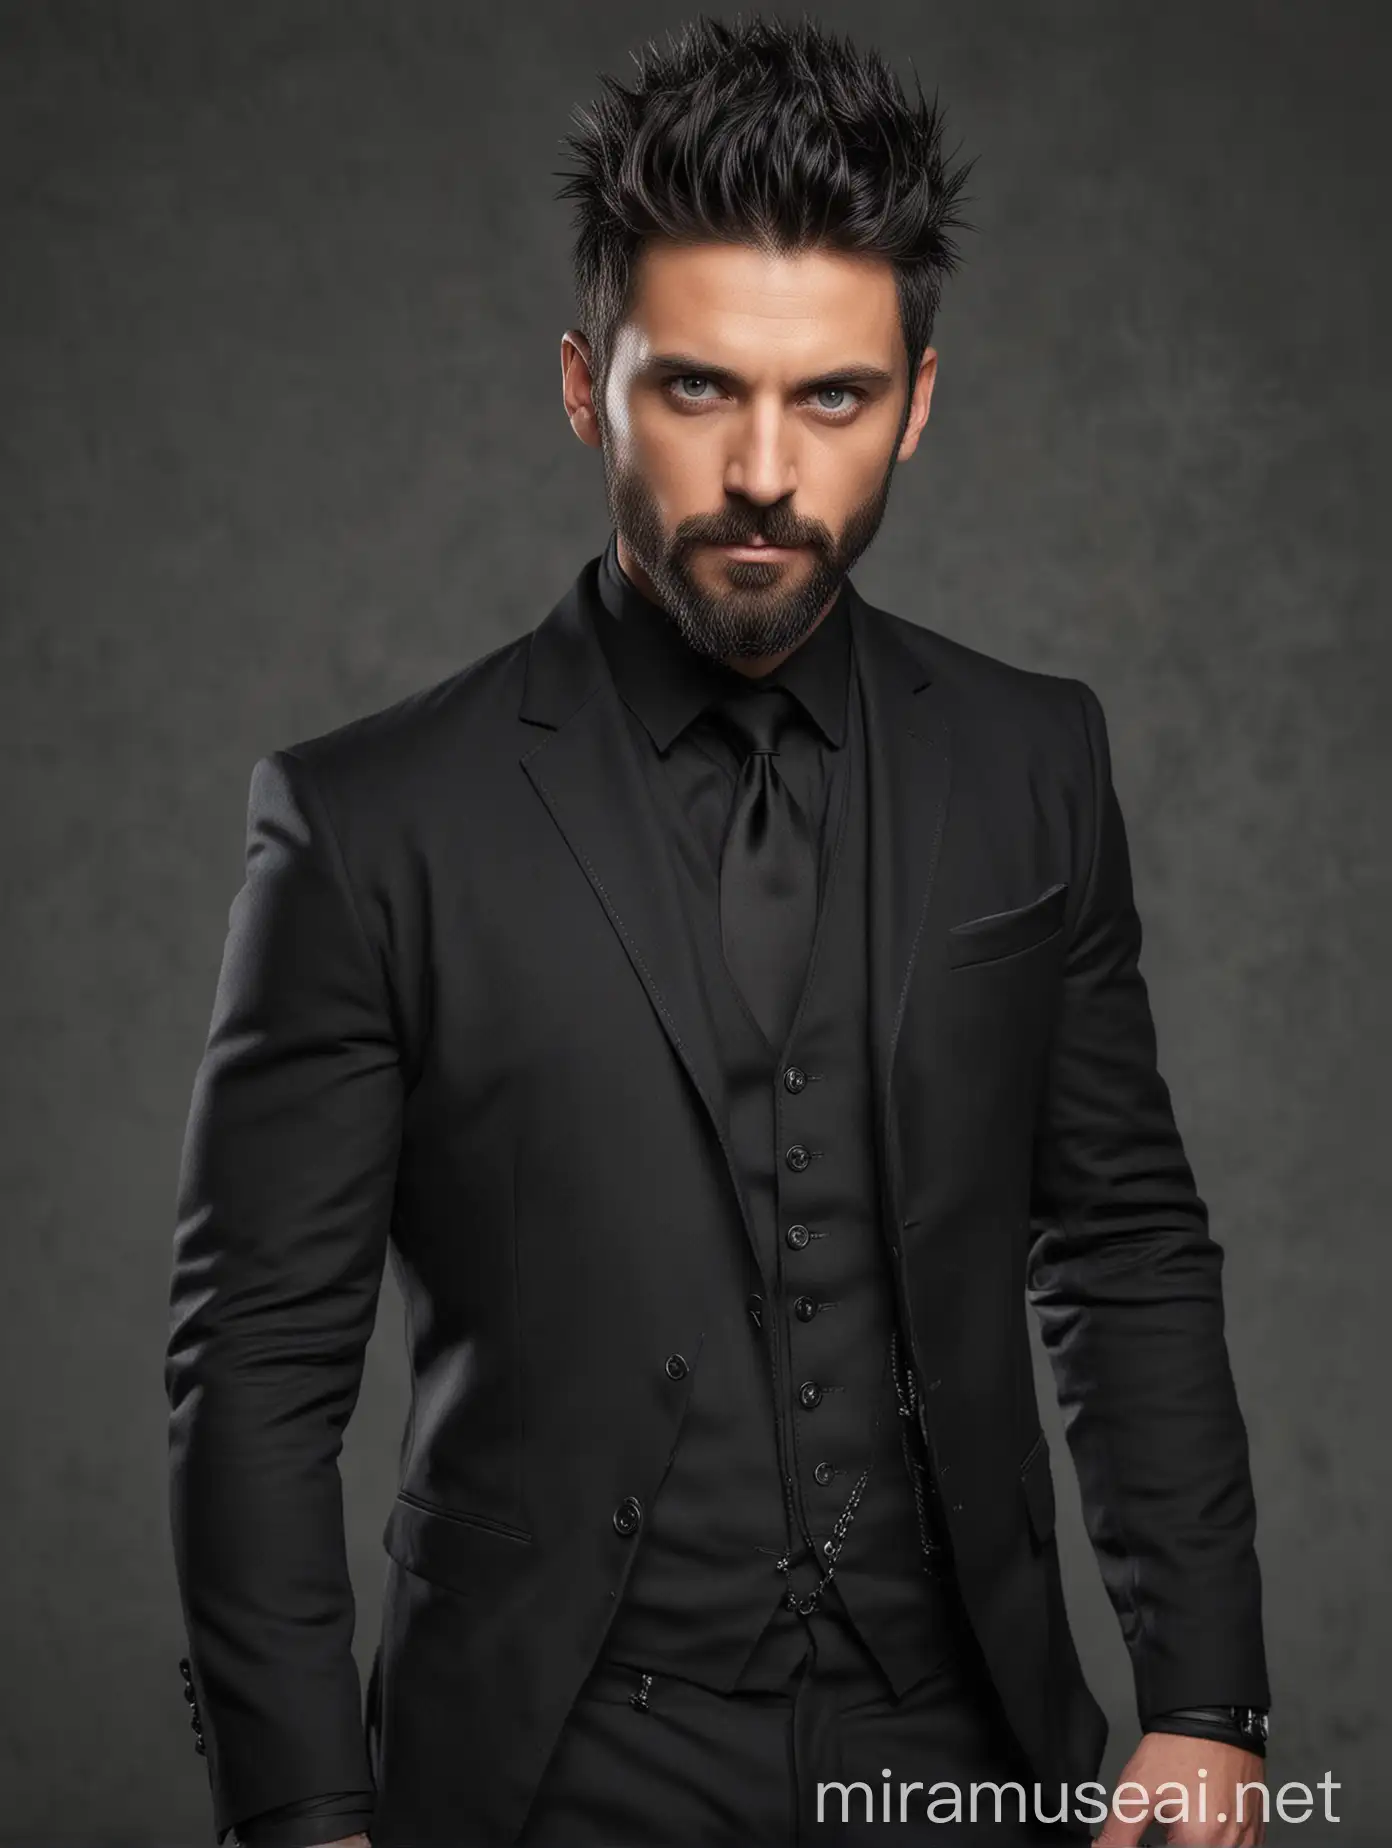 Strong Handsome Man in Black Suit with Spiky Hair and Clear Eyes